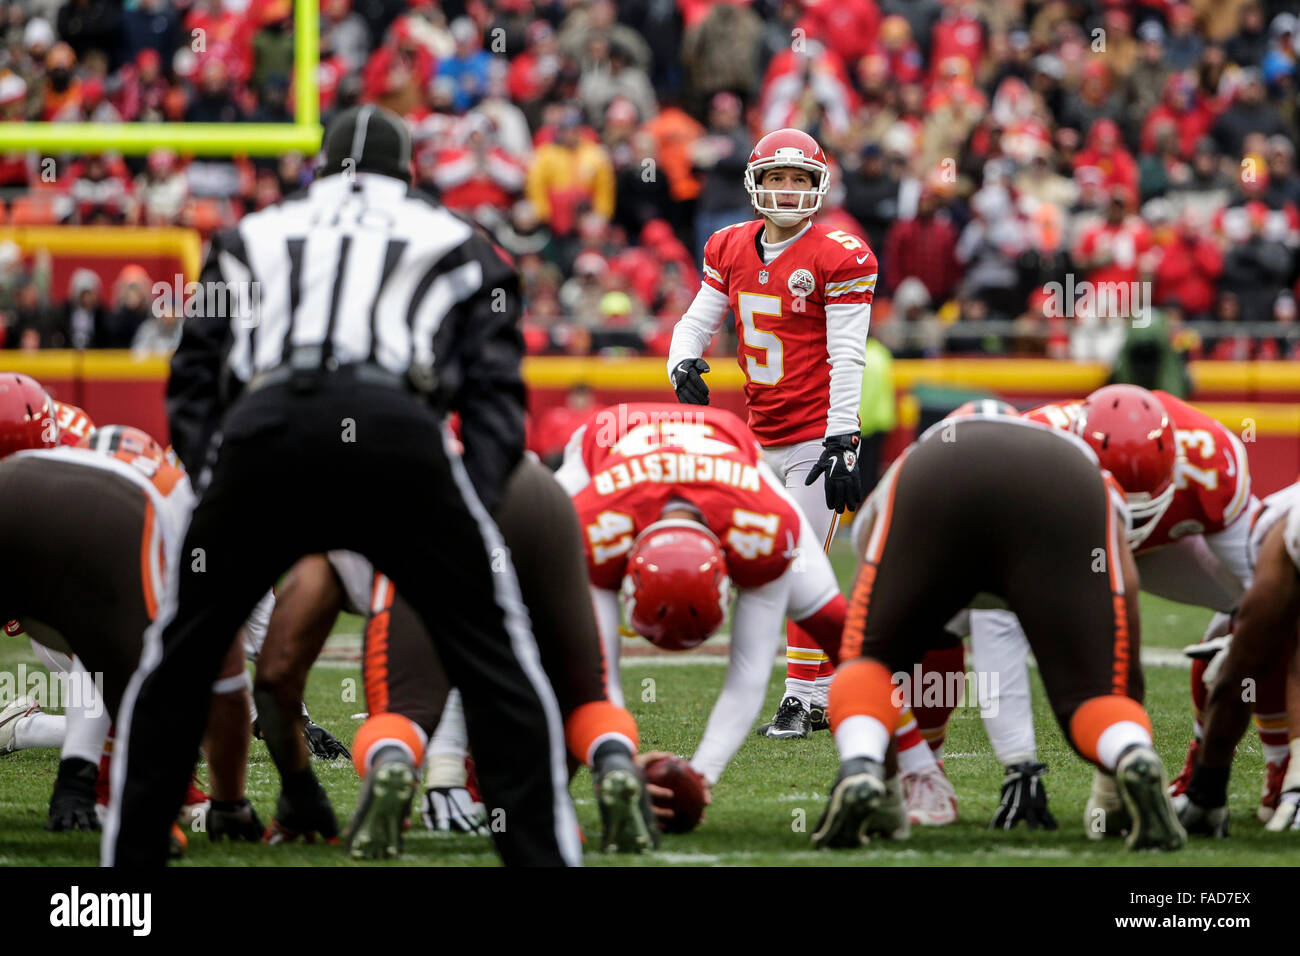 December 27, 2015: Kansas City Chiefs kicker Cairo Santos (5) prepares to kick a field goal during the NFL game between the Cleveland Browns and the Kansas City Chiefs at Arrowhead Stadium in Kansas City, MO Tim Warner/CSM. Stock Photo